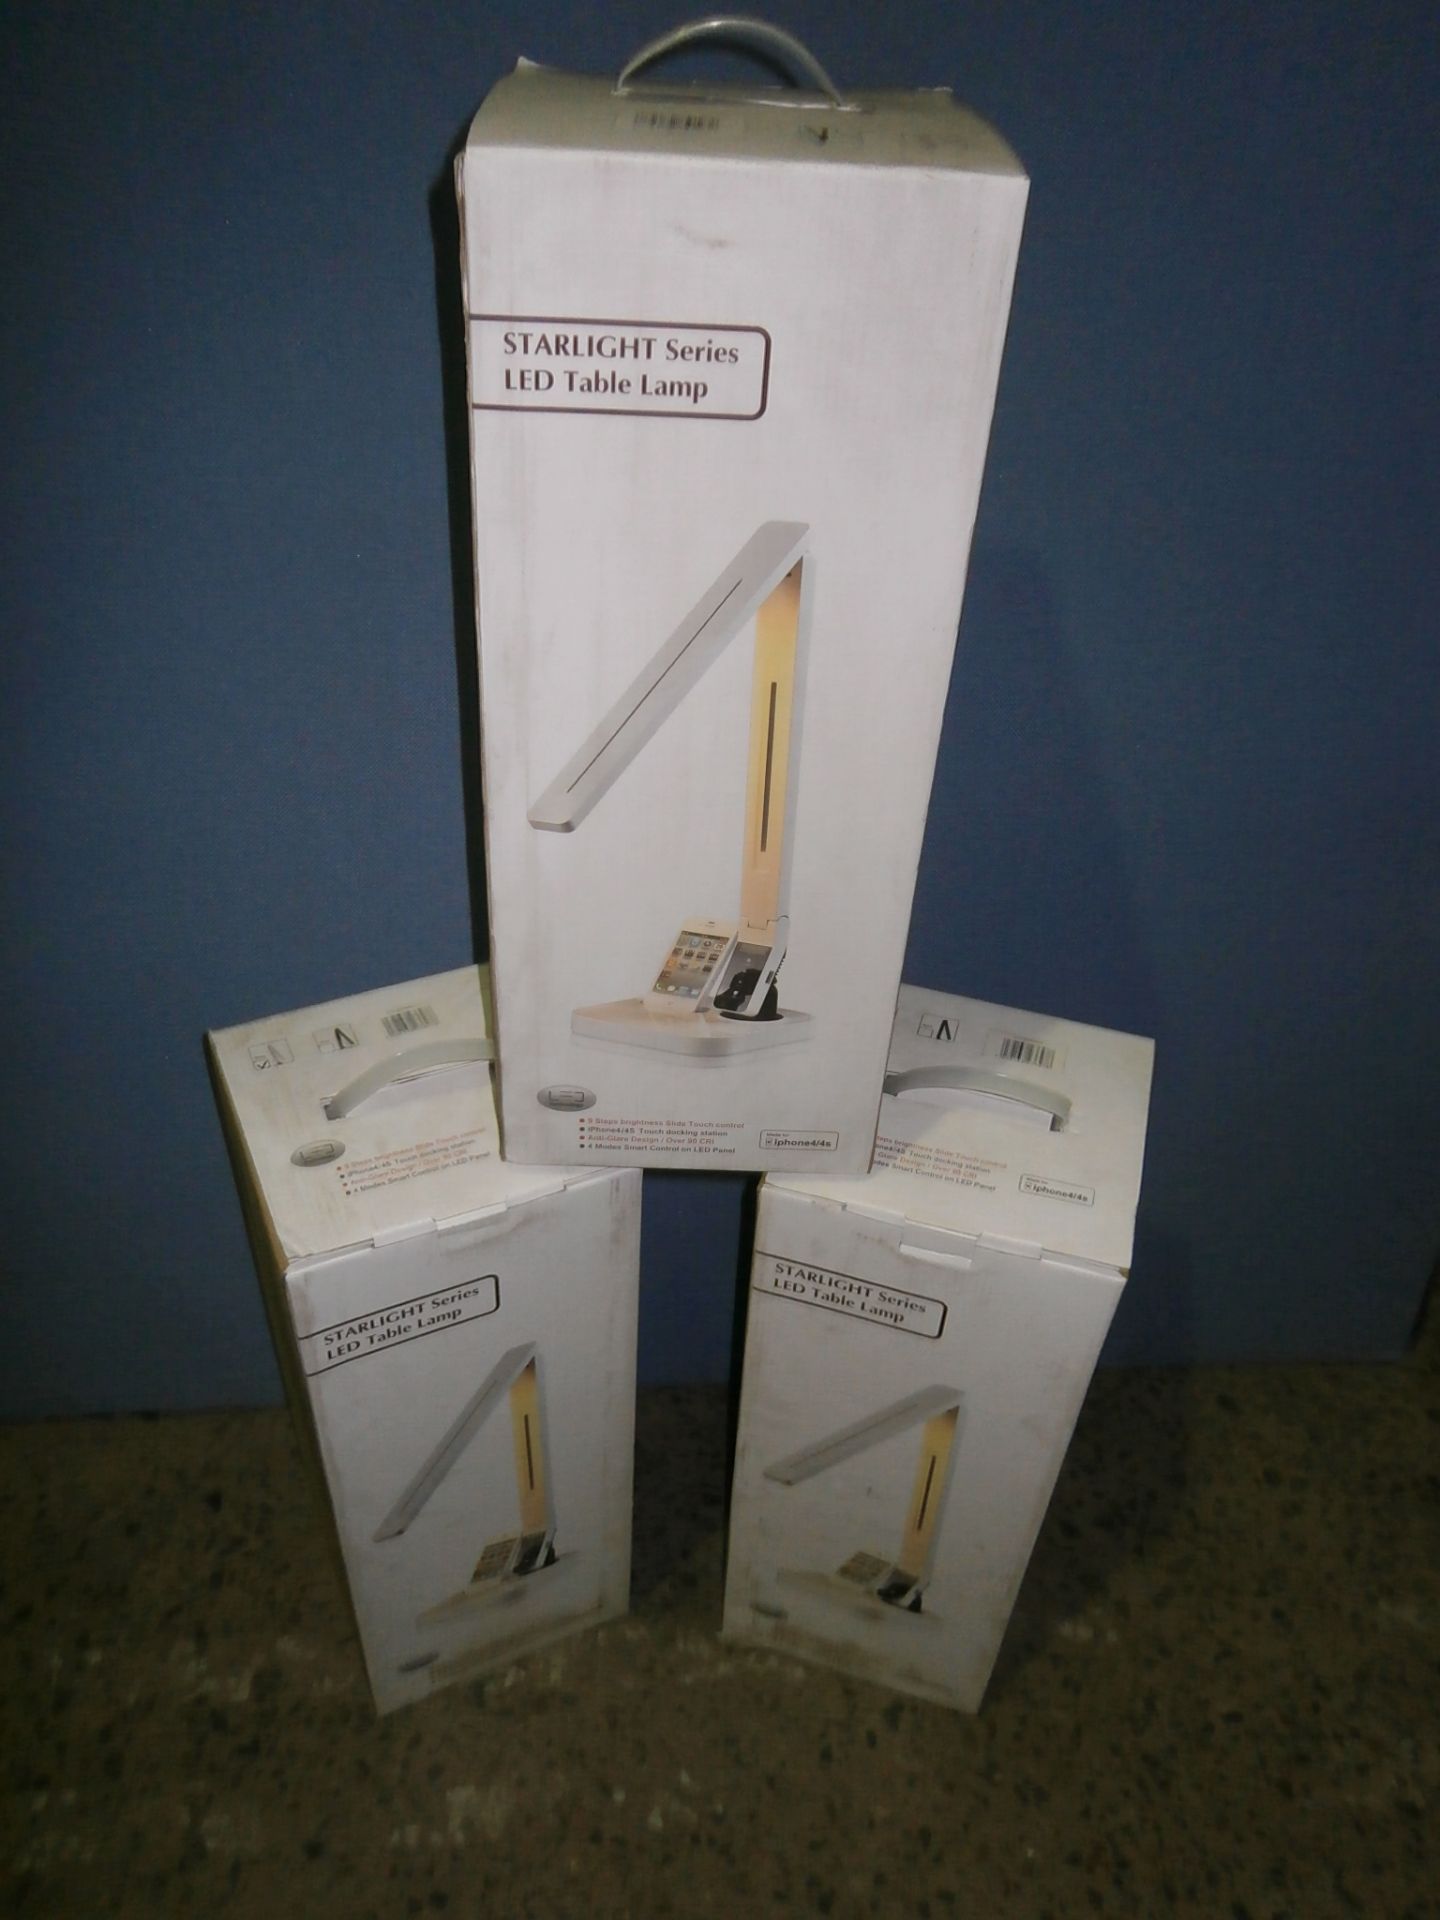 3 x Starlight Series LED Multifunction Table Lamps With iPhone Docking Capabilities - RRP £99.99